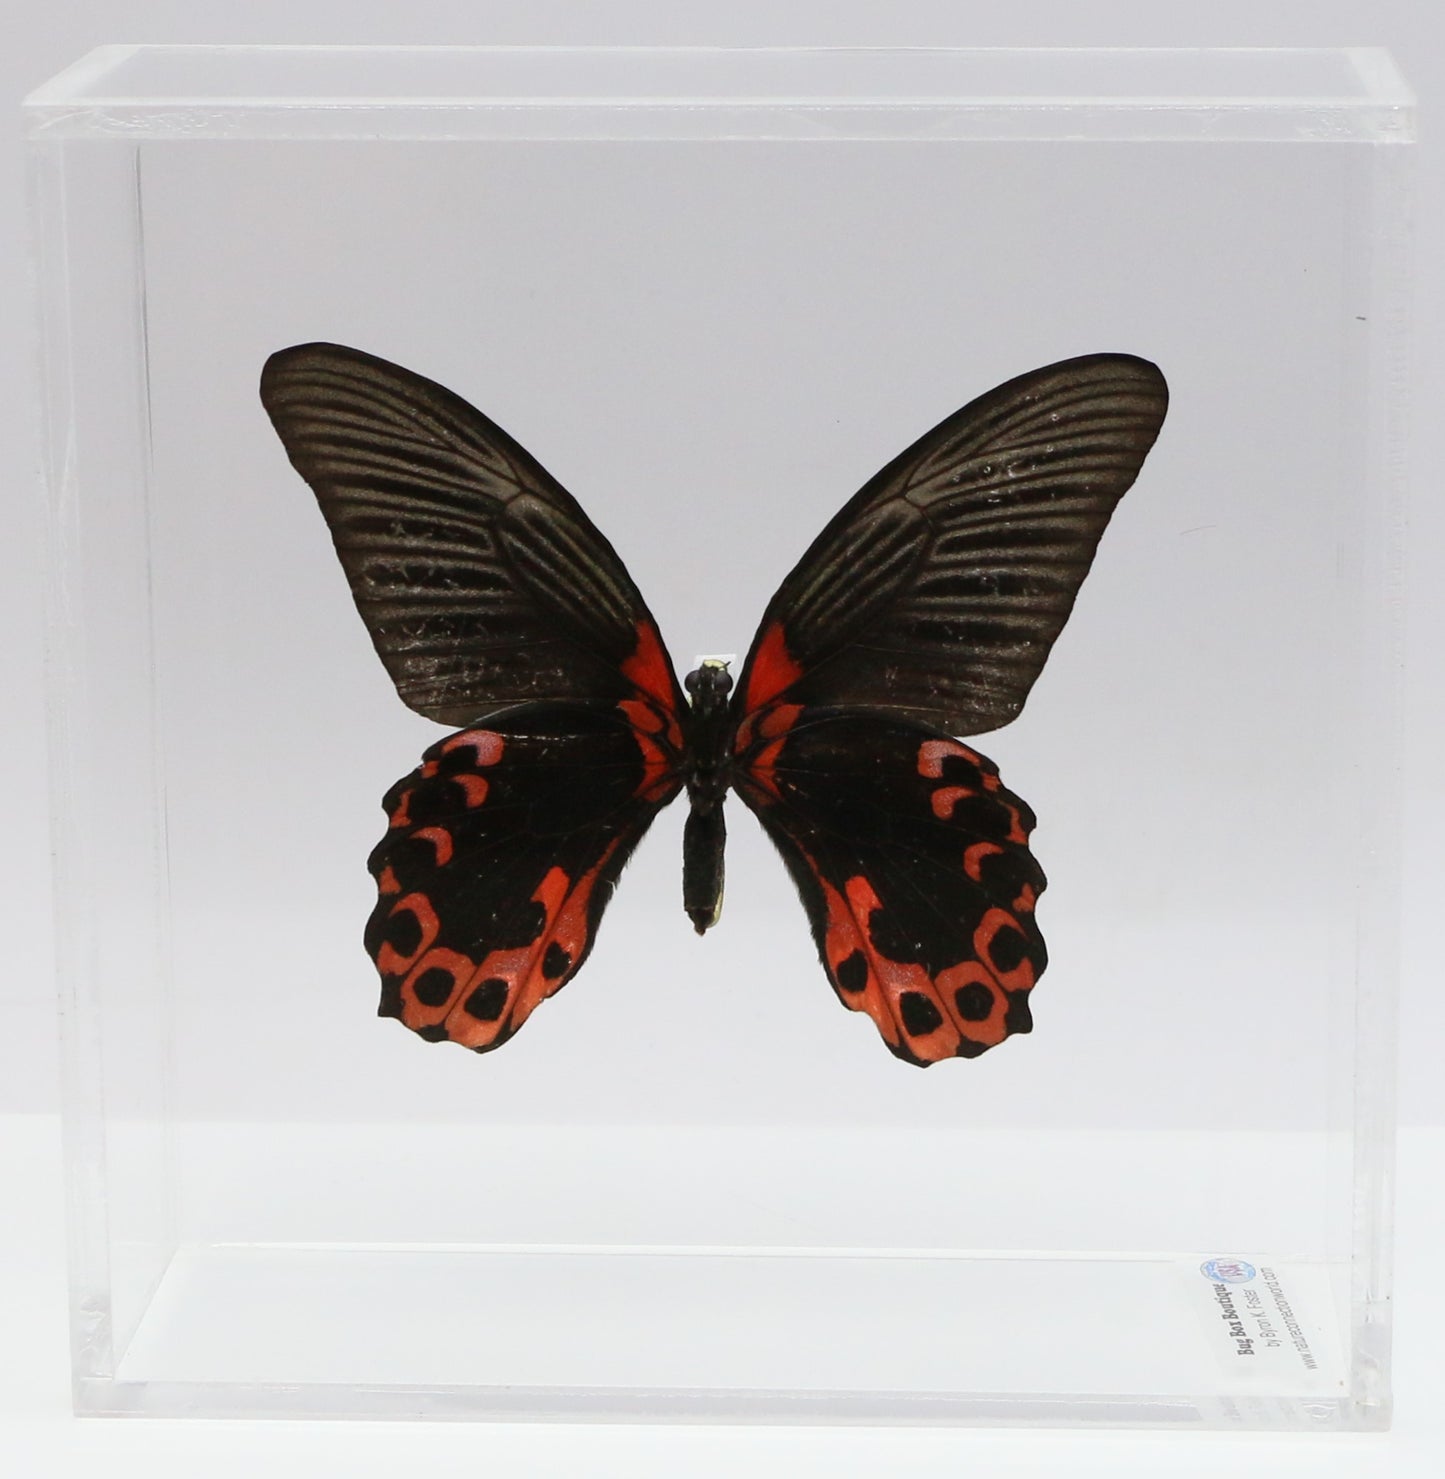 9060606 - Real Butterfly Acrylic Display Box - 6" X 6" - Scarlet Mormon (Papilio rumanzovia) - Ventral